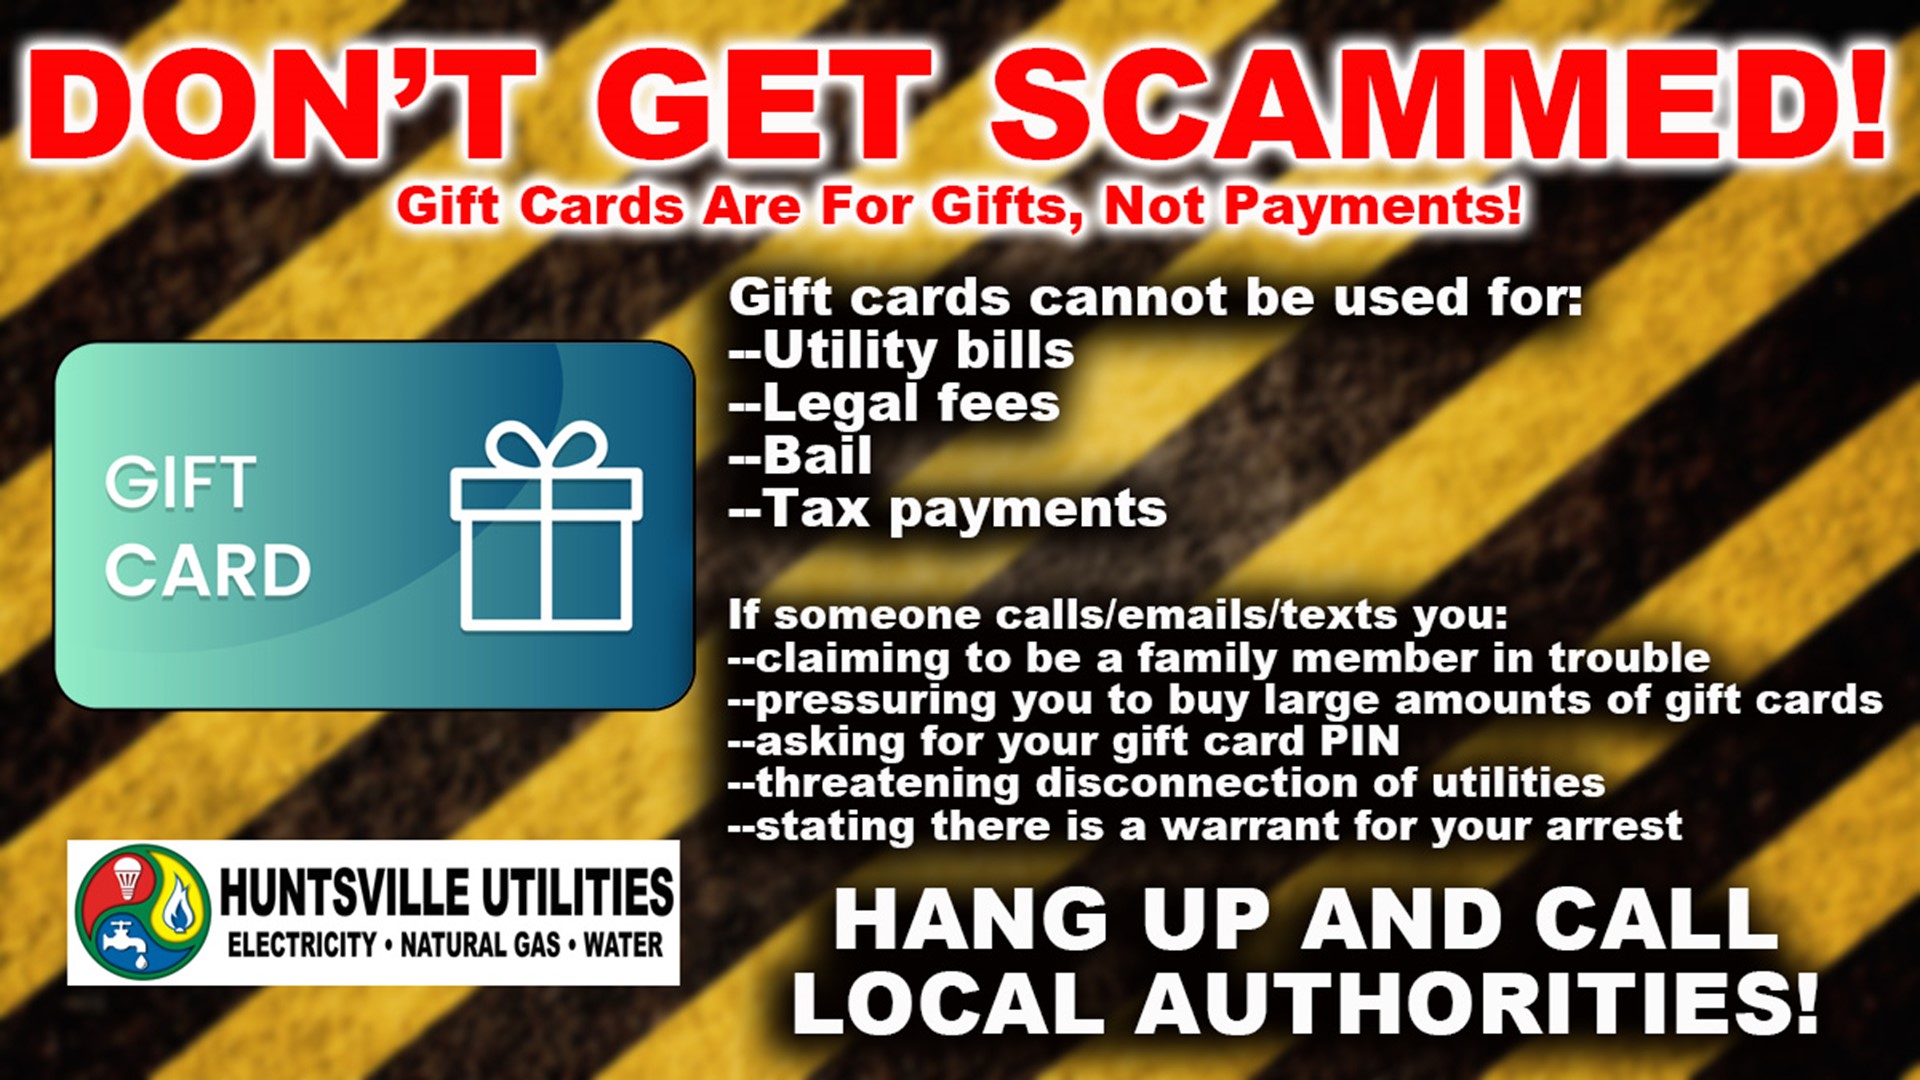 Scammers ask customers to pay them with gift cards or their power will be cut off, or they say the customer has an old meter and needs to pay for an upgrade.